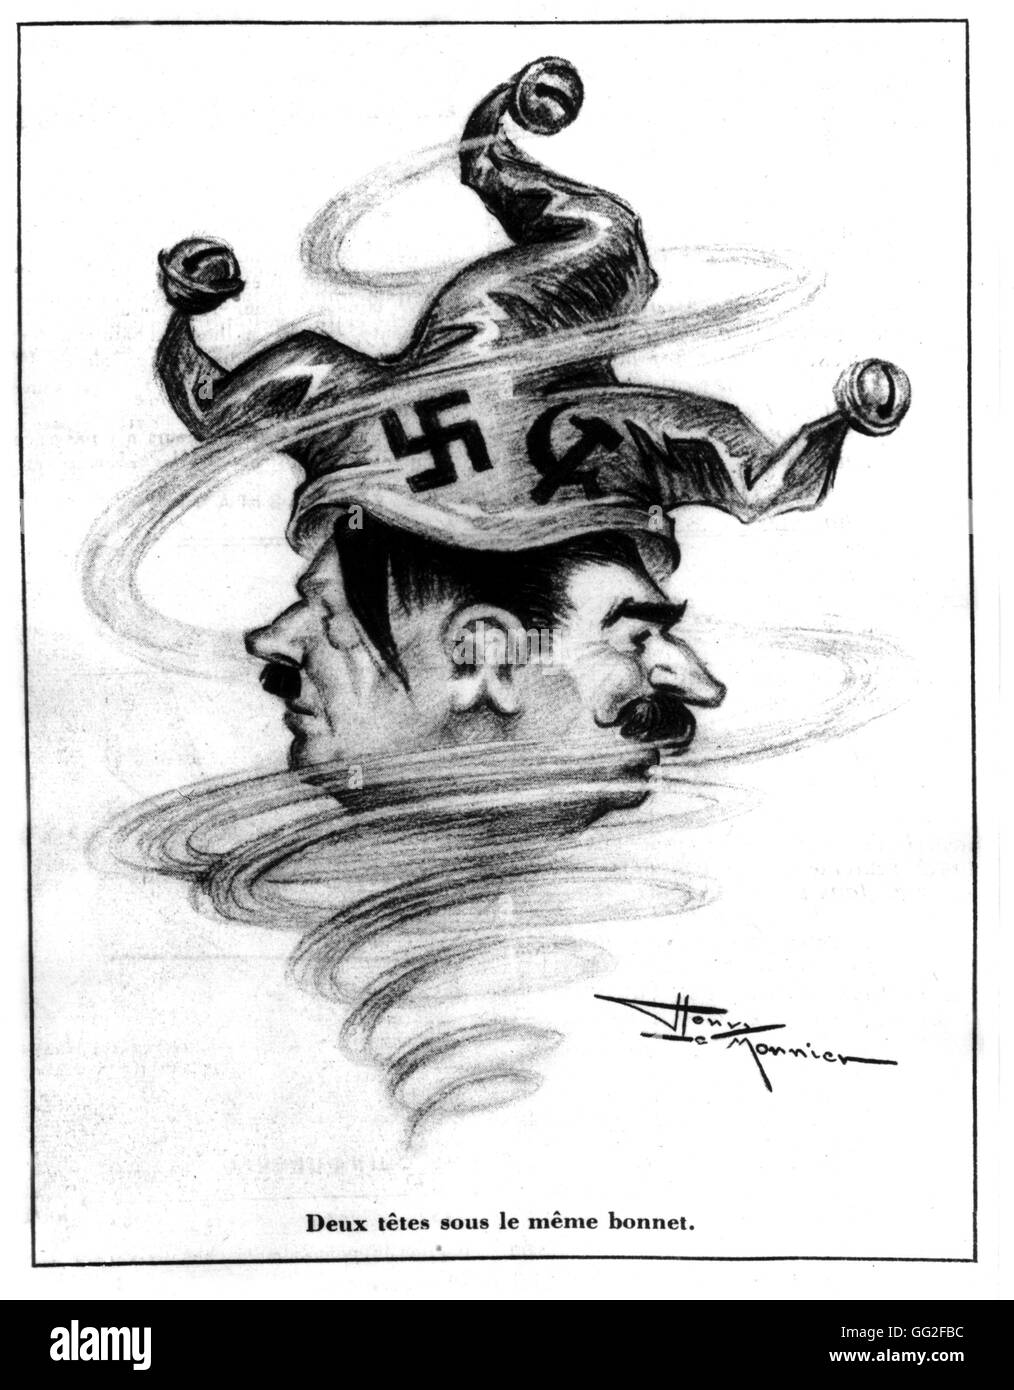 Satirical cartoon by Henri Le Monnier, published in 'Marianne': two heads under the same cap. Hitler and Stalin December 13, 1939 France - Second World War Stock Photo